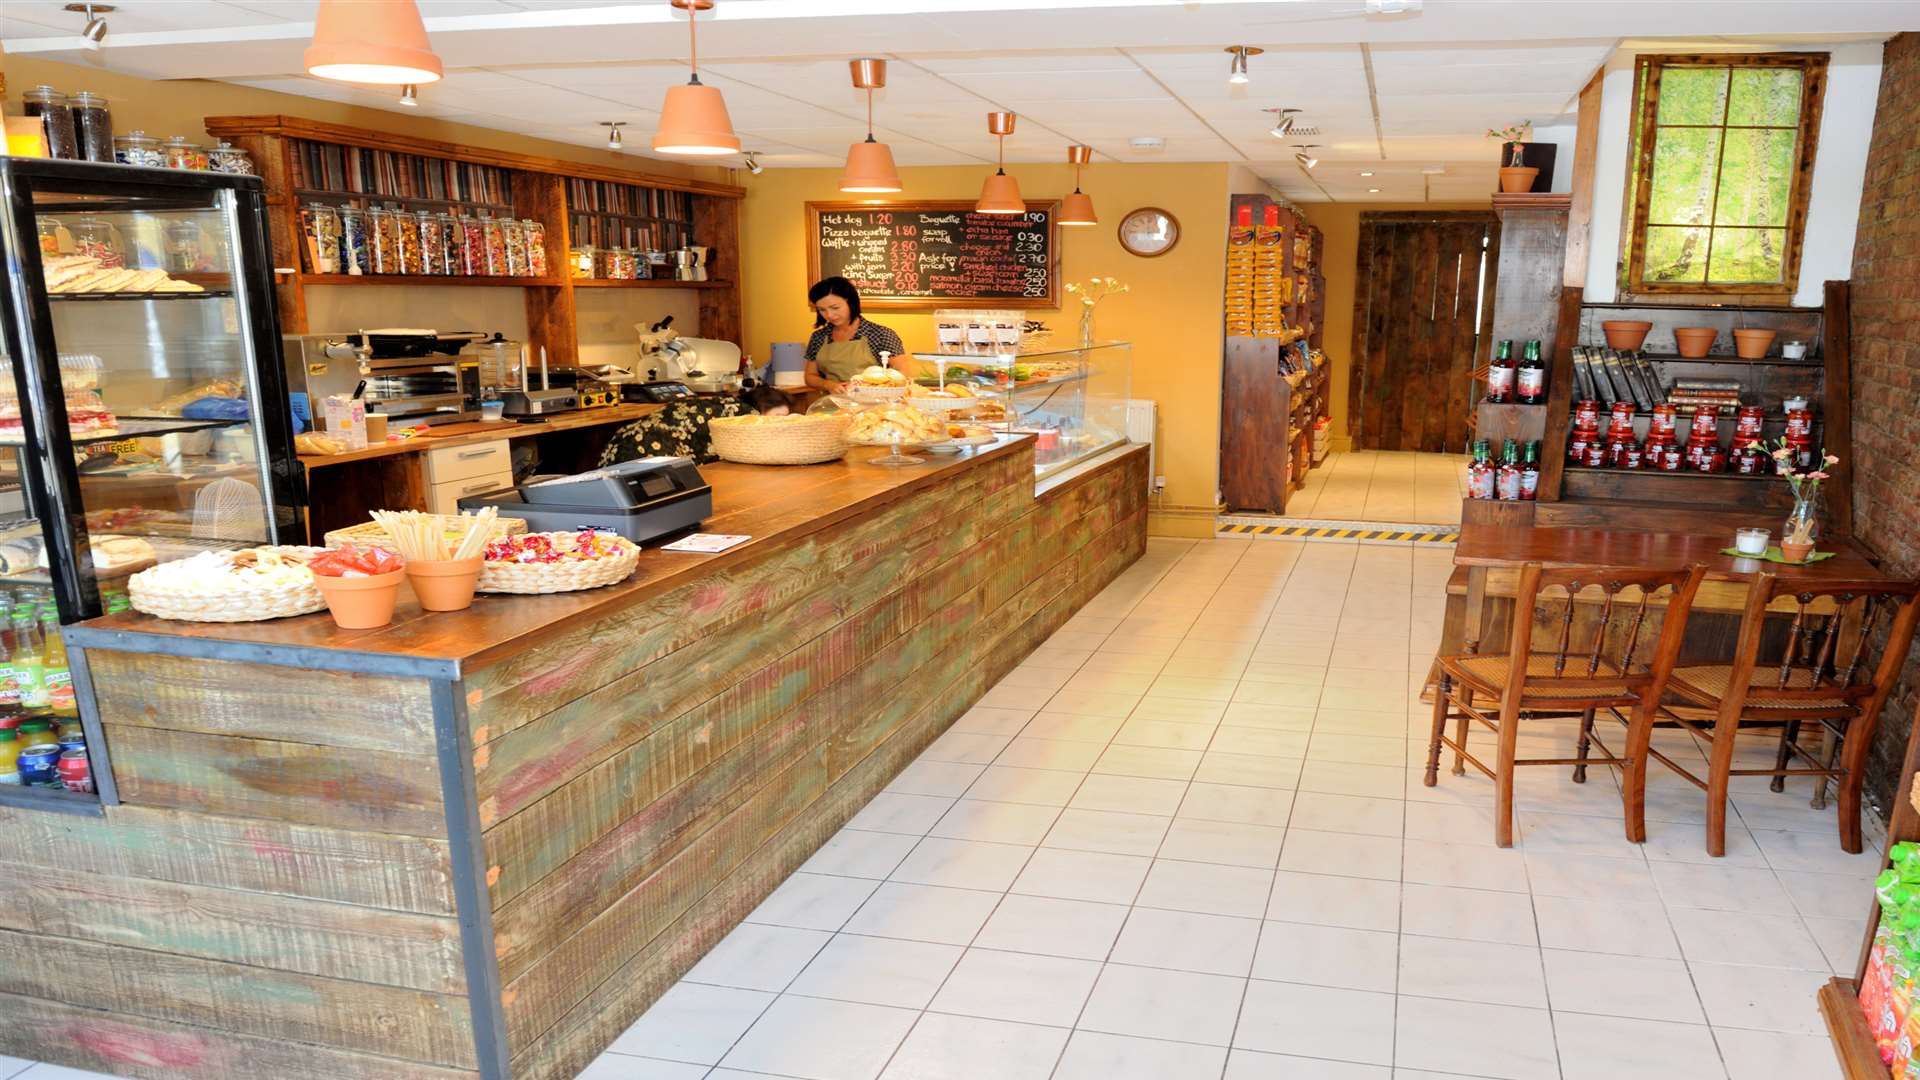 Five Steps Coffee and Deli opened on Monday last week.